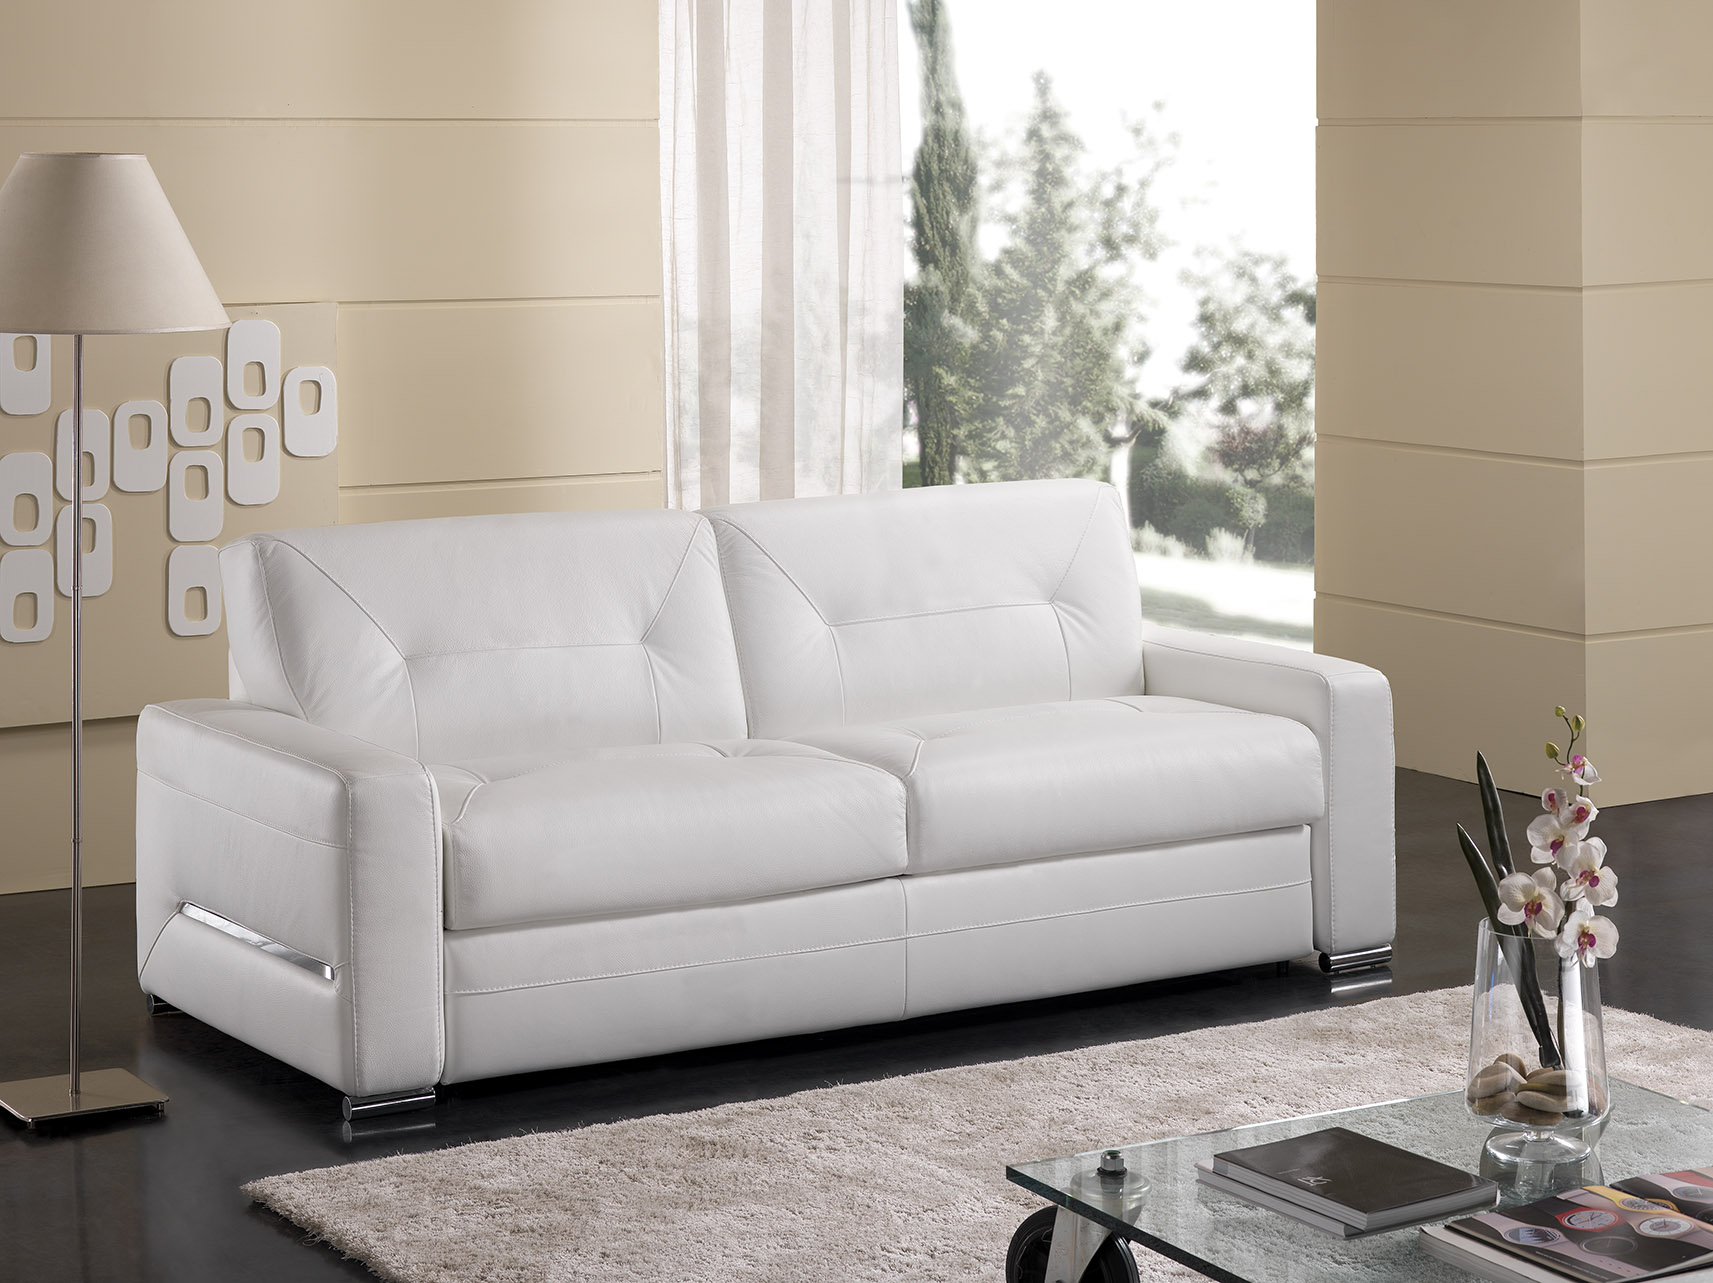 Clearance Living Room Clio Sofa Bed